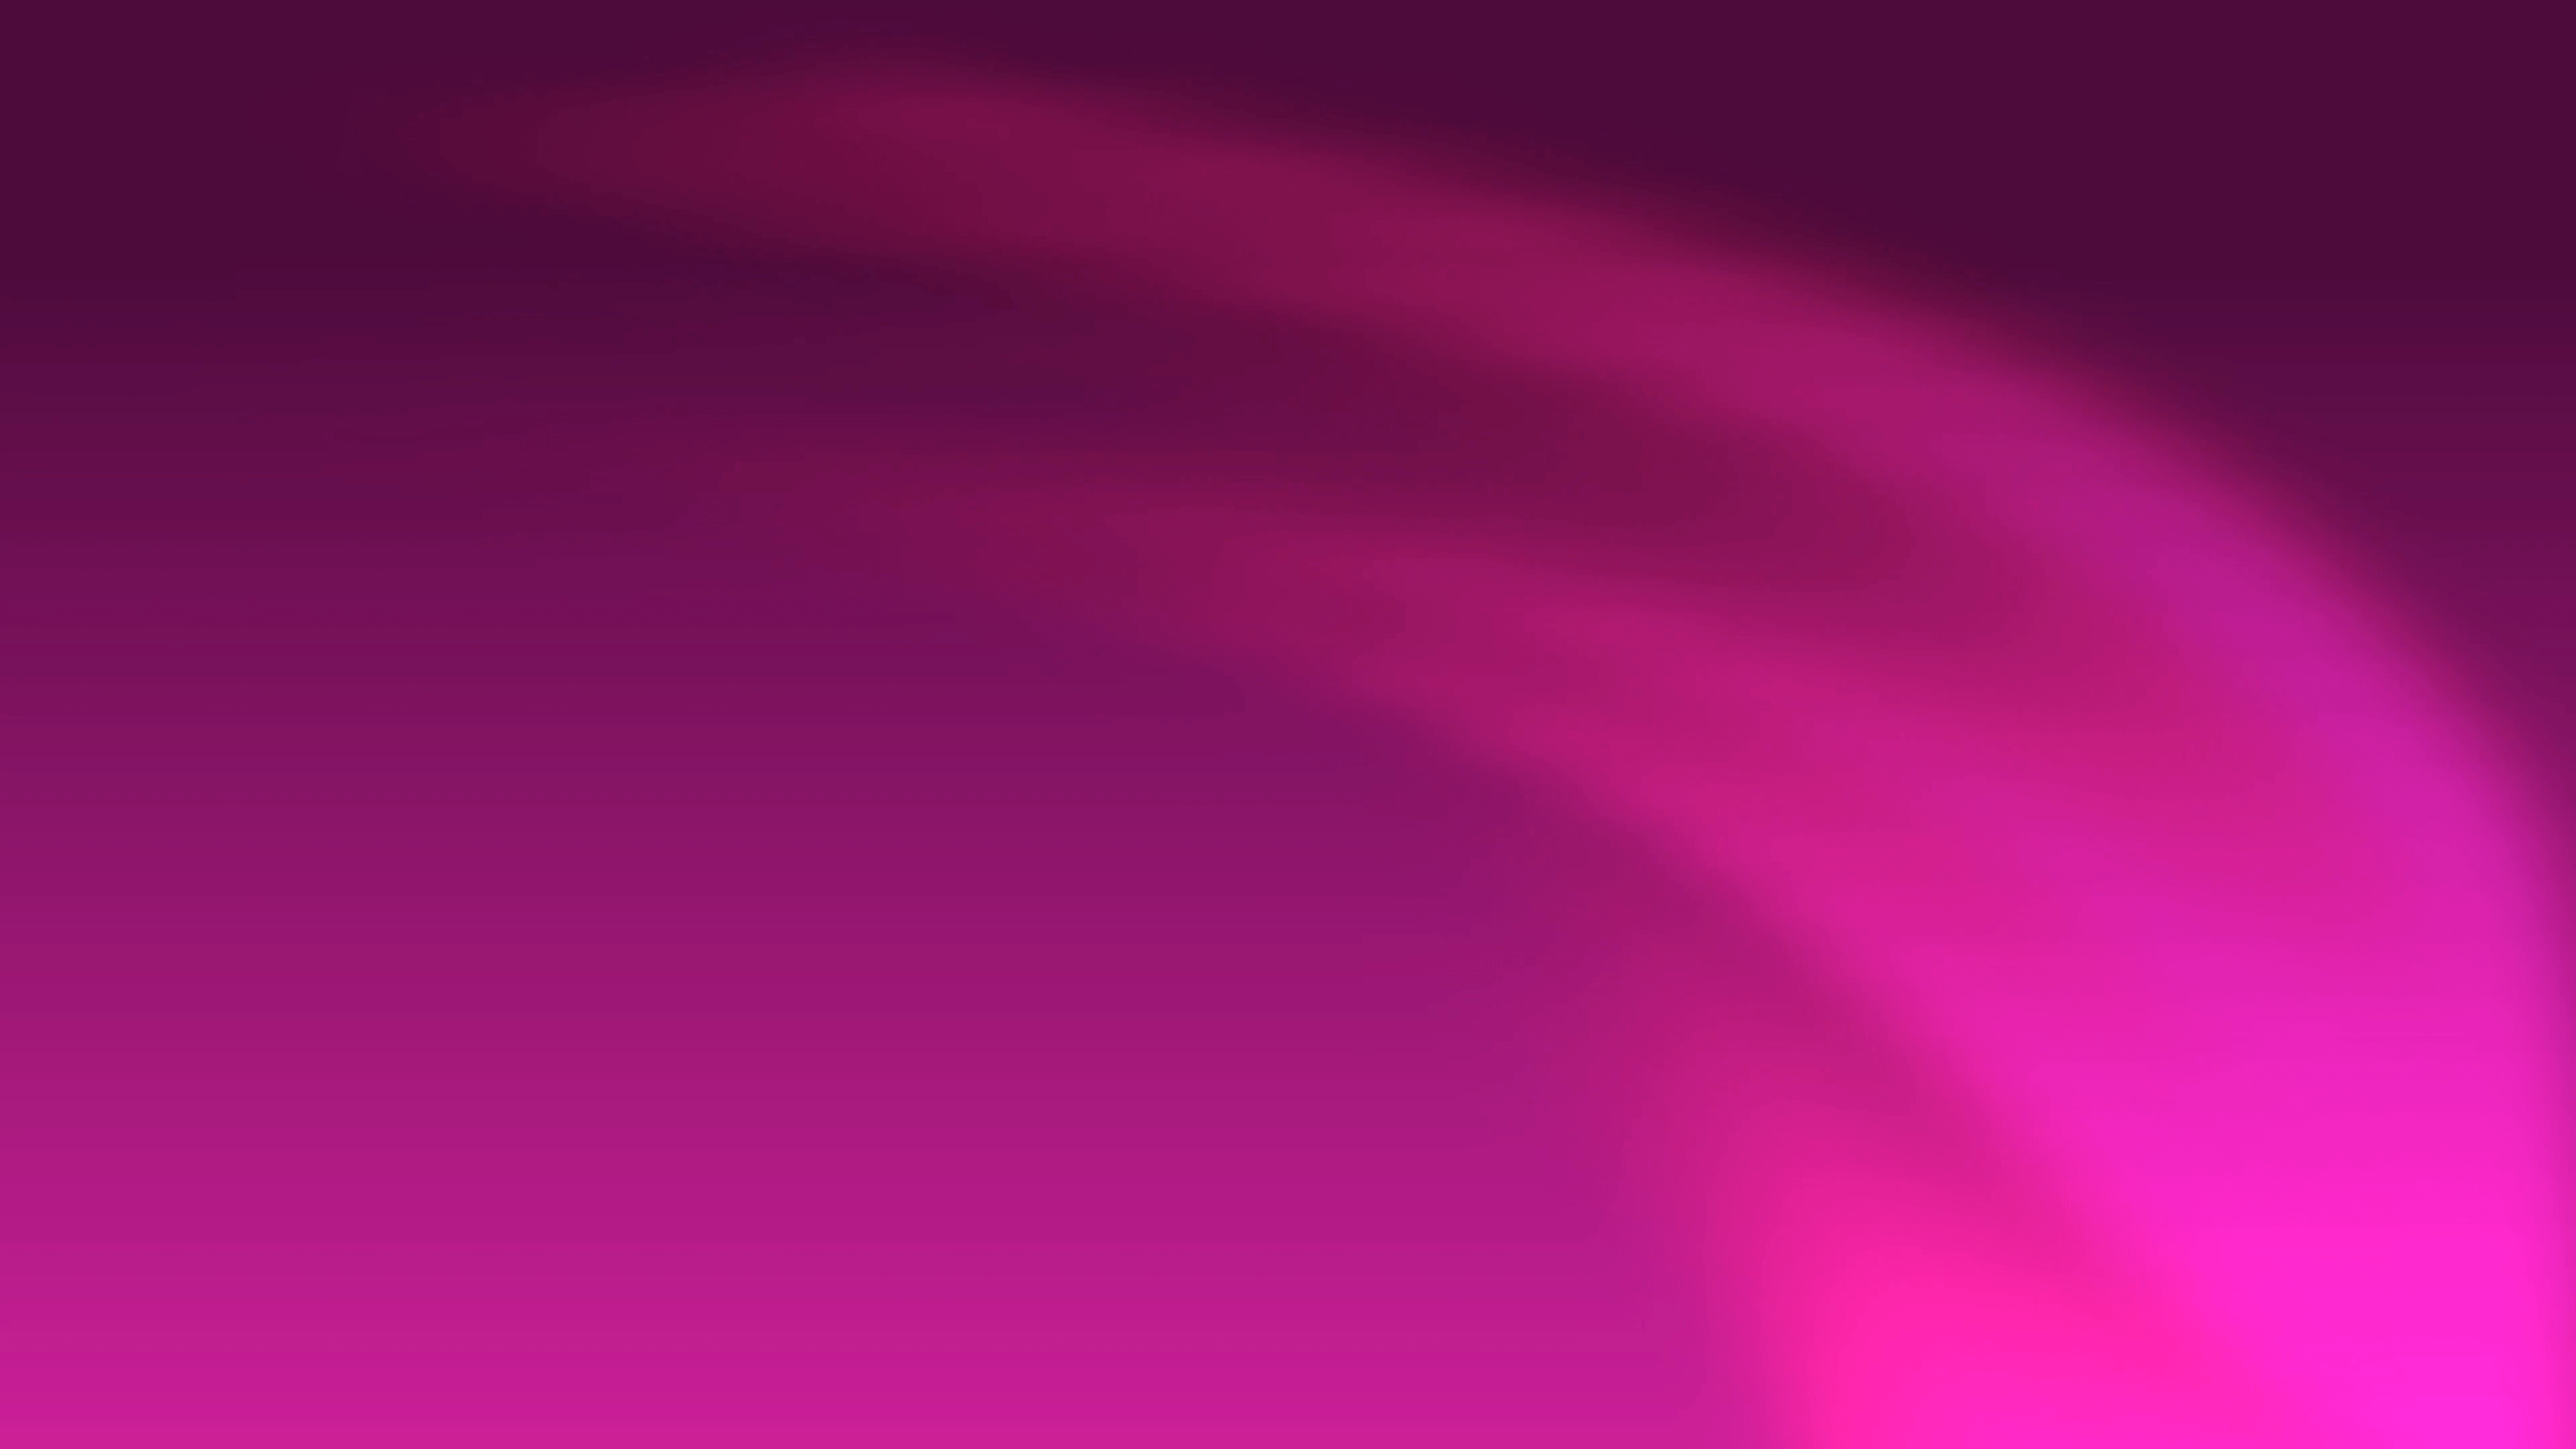 Soft pink light curves move upwards against a pink background